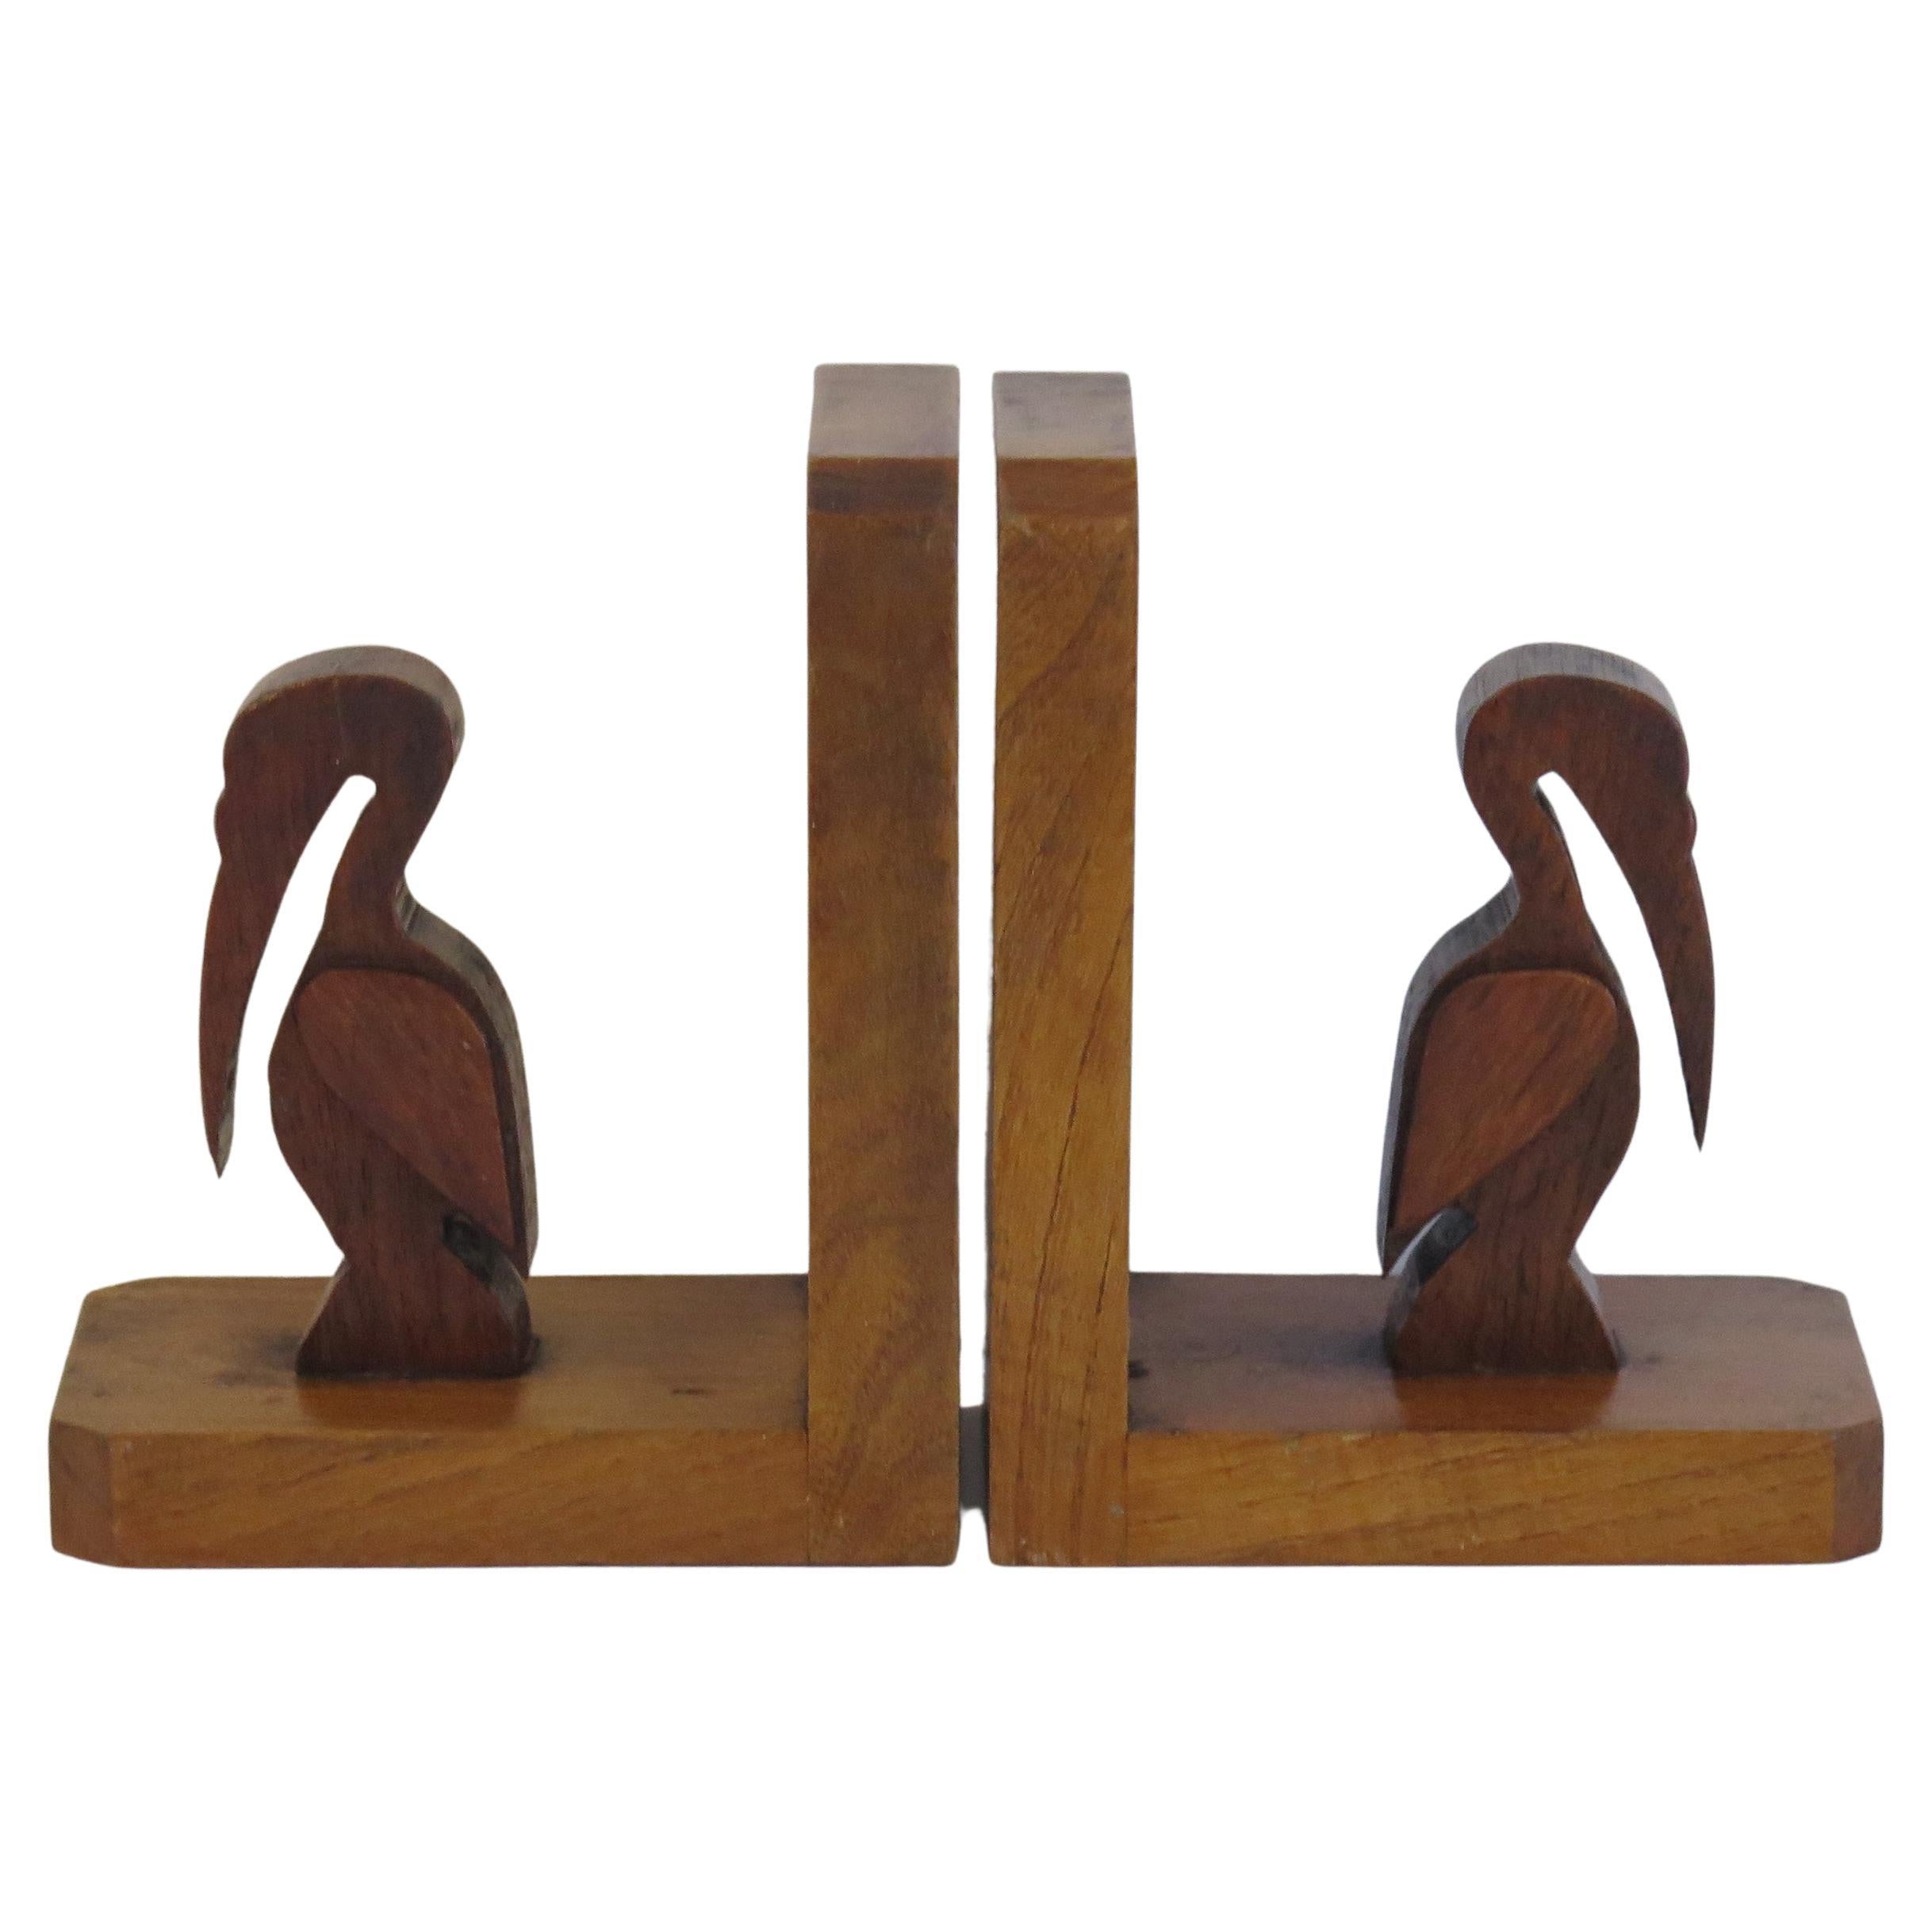 Art Deco Pair of Pelican Figure Bookends in Hand Carved Woods, circa 1930